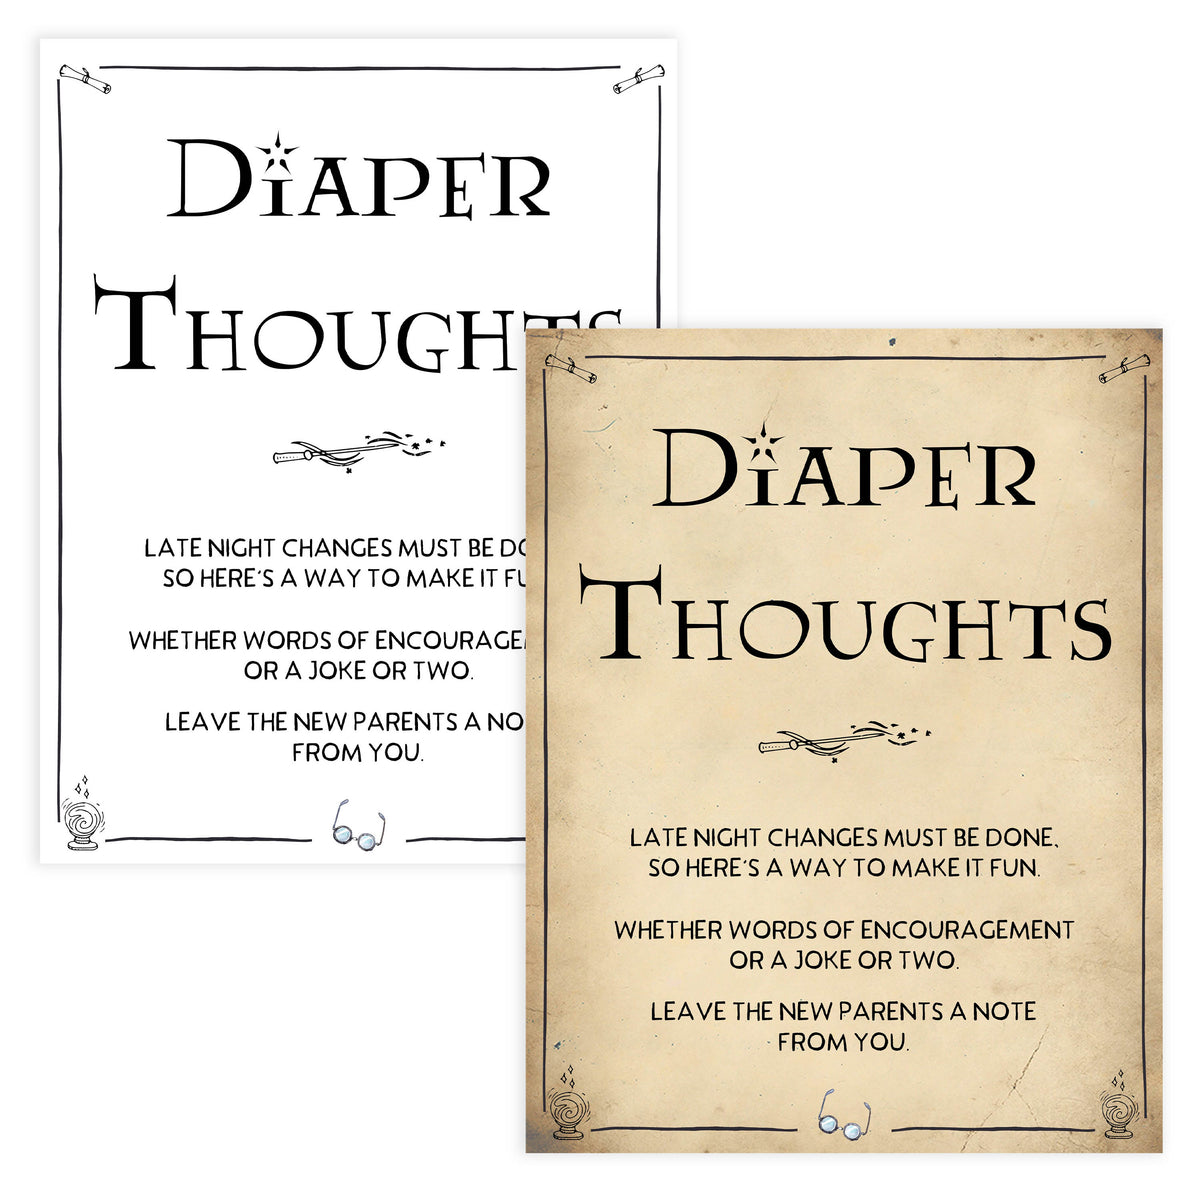 Diaper Thoughts, Late Night Diapers Sign, Wizard baby shower games, printable baby shower games, Harry Potter baby games, Harry Potter baby shower, fun baby shower games,  fun baby ideas